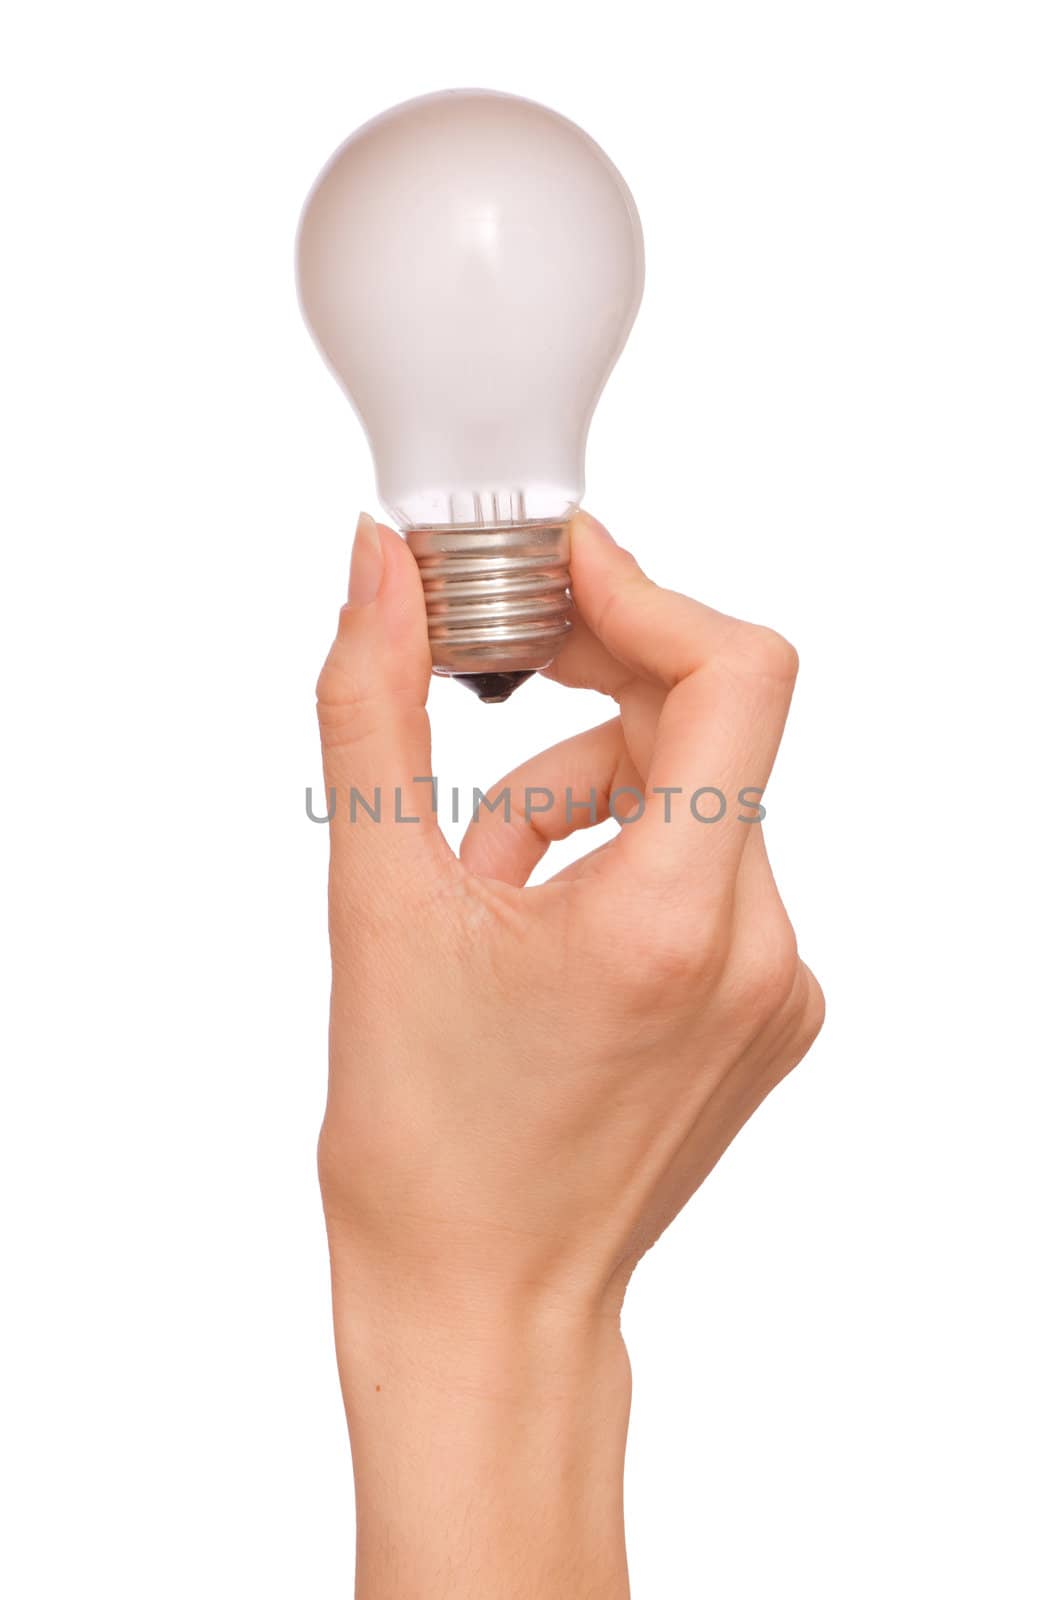 lamp in the woman's hand as a symbol of light